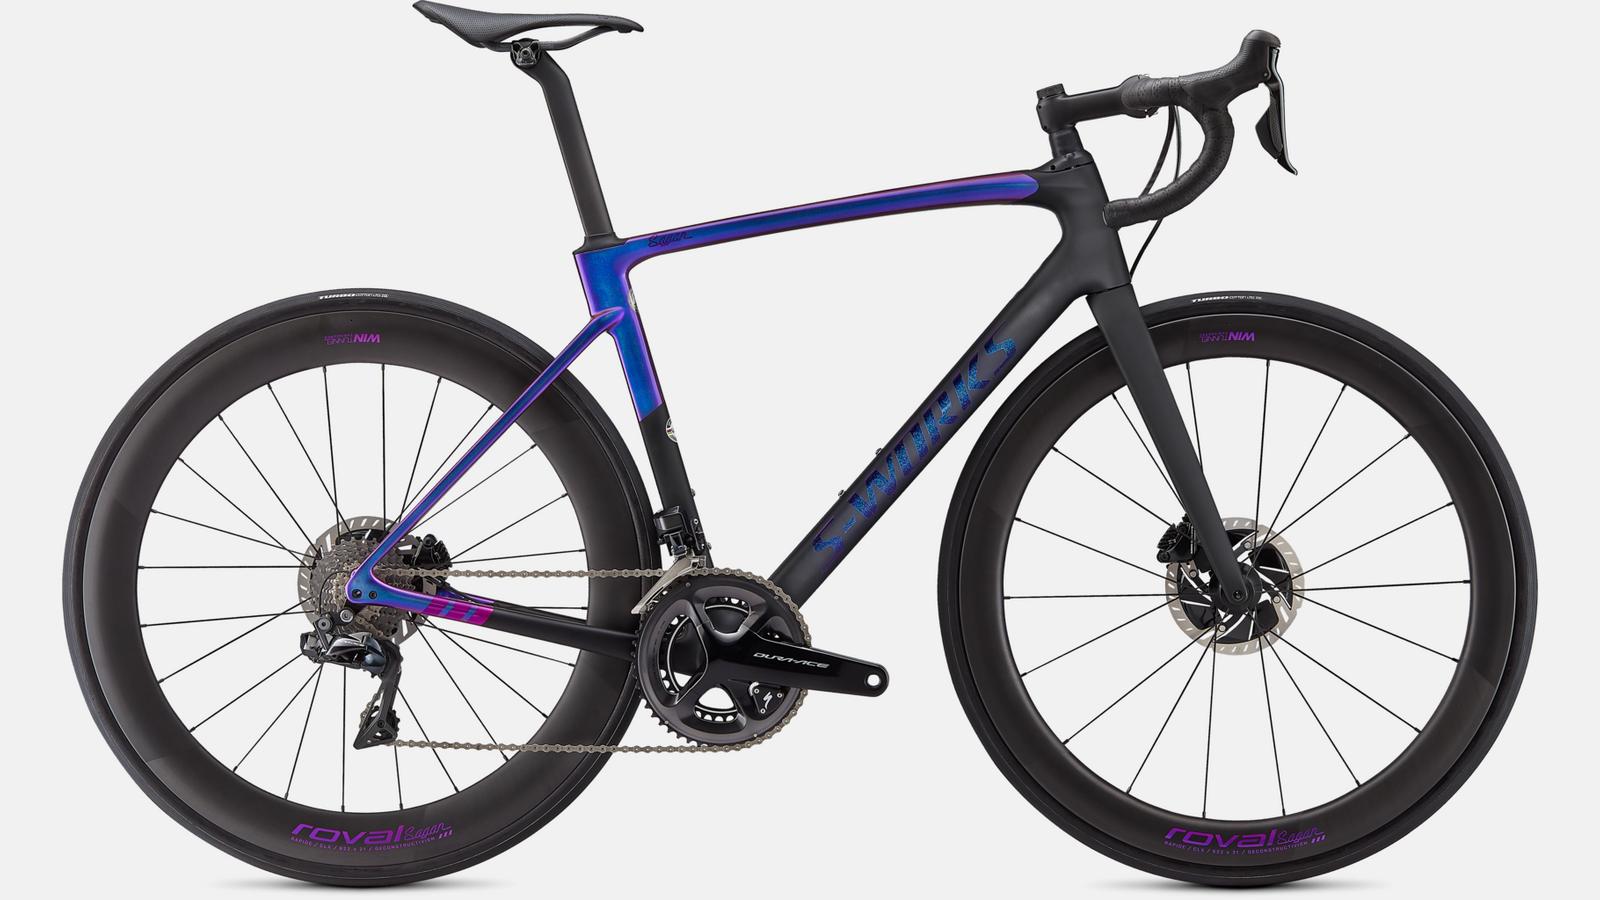 Paint for 2021 Specialized S-Works Roubaix - Gloss Sagan Collection - Gloss Black Tint